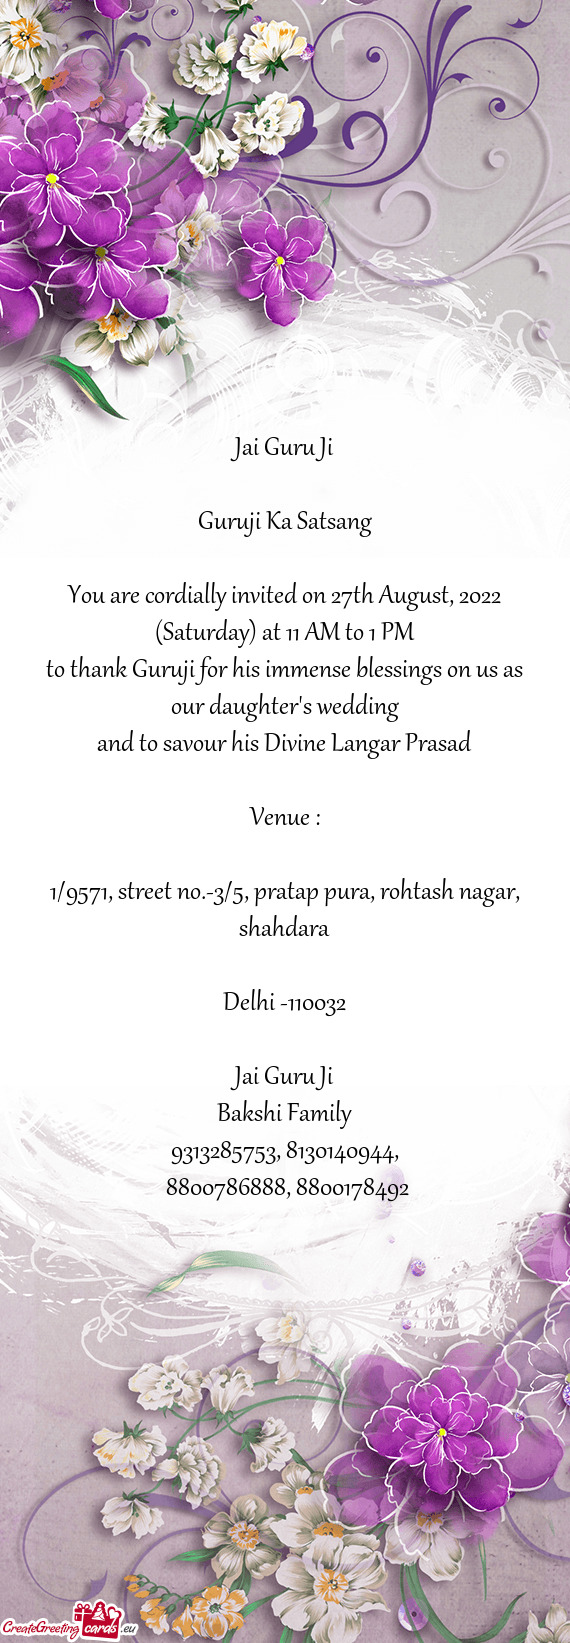 You are cordially invited on 27th August, 2022 (Saturday) at 11 AM to 1 PM